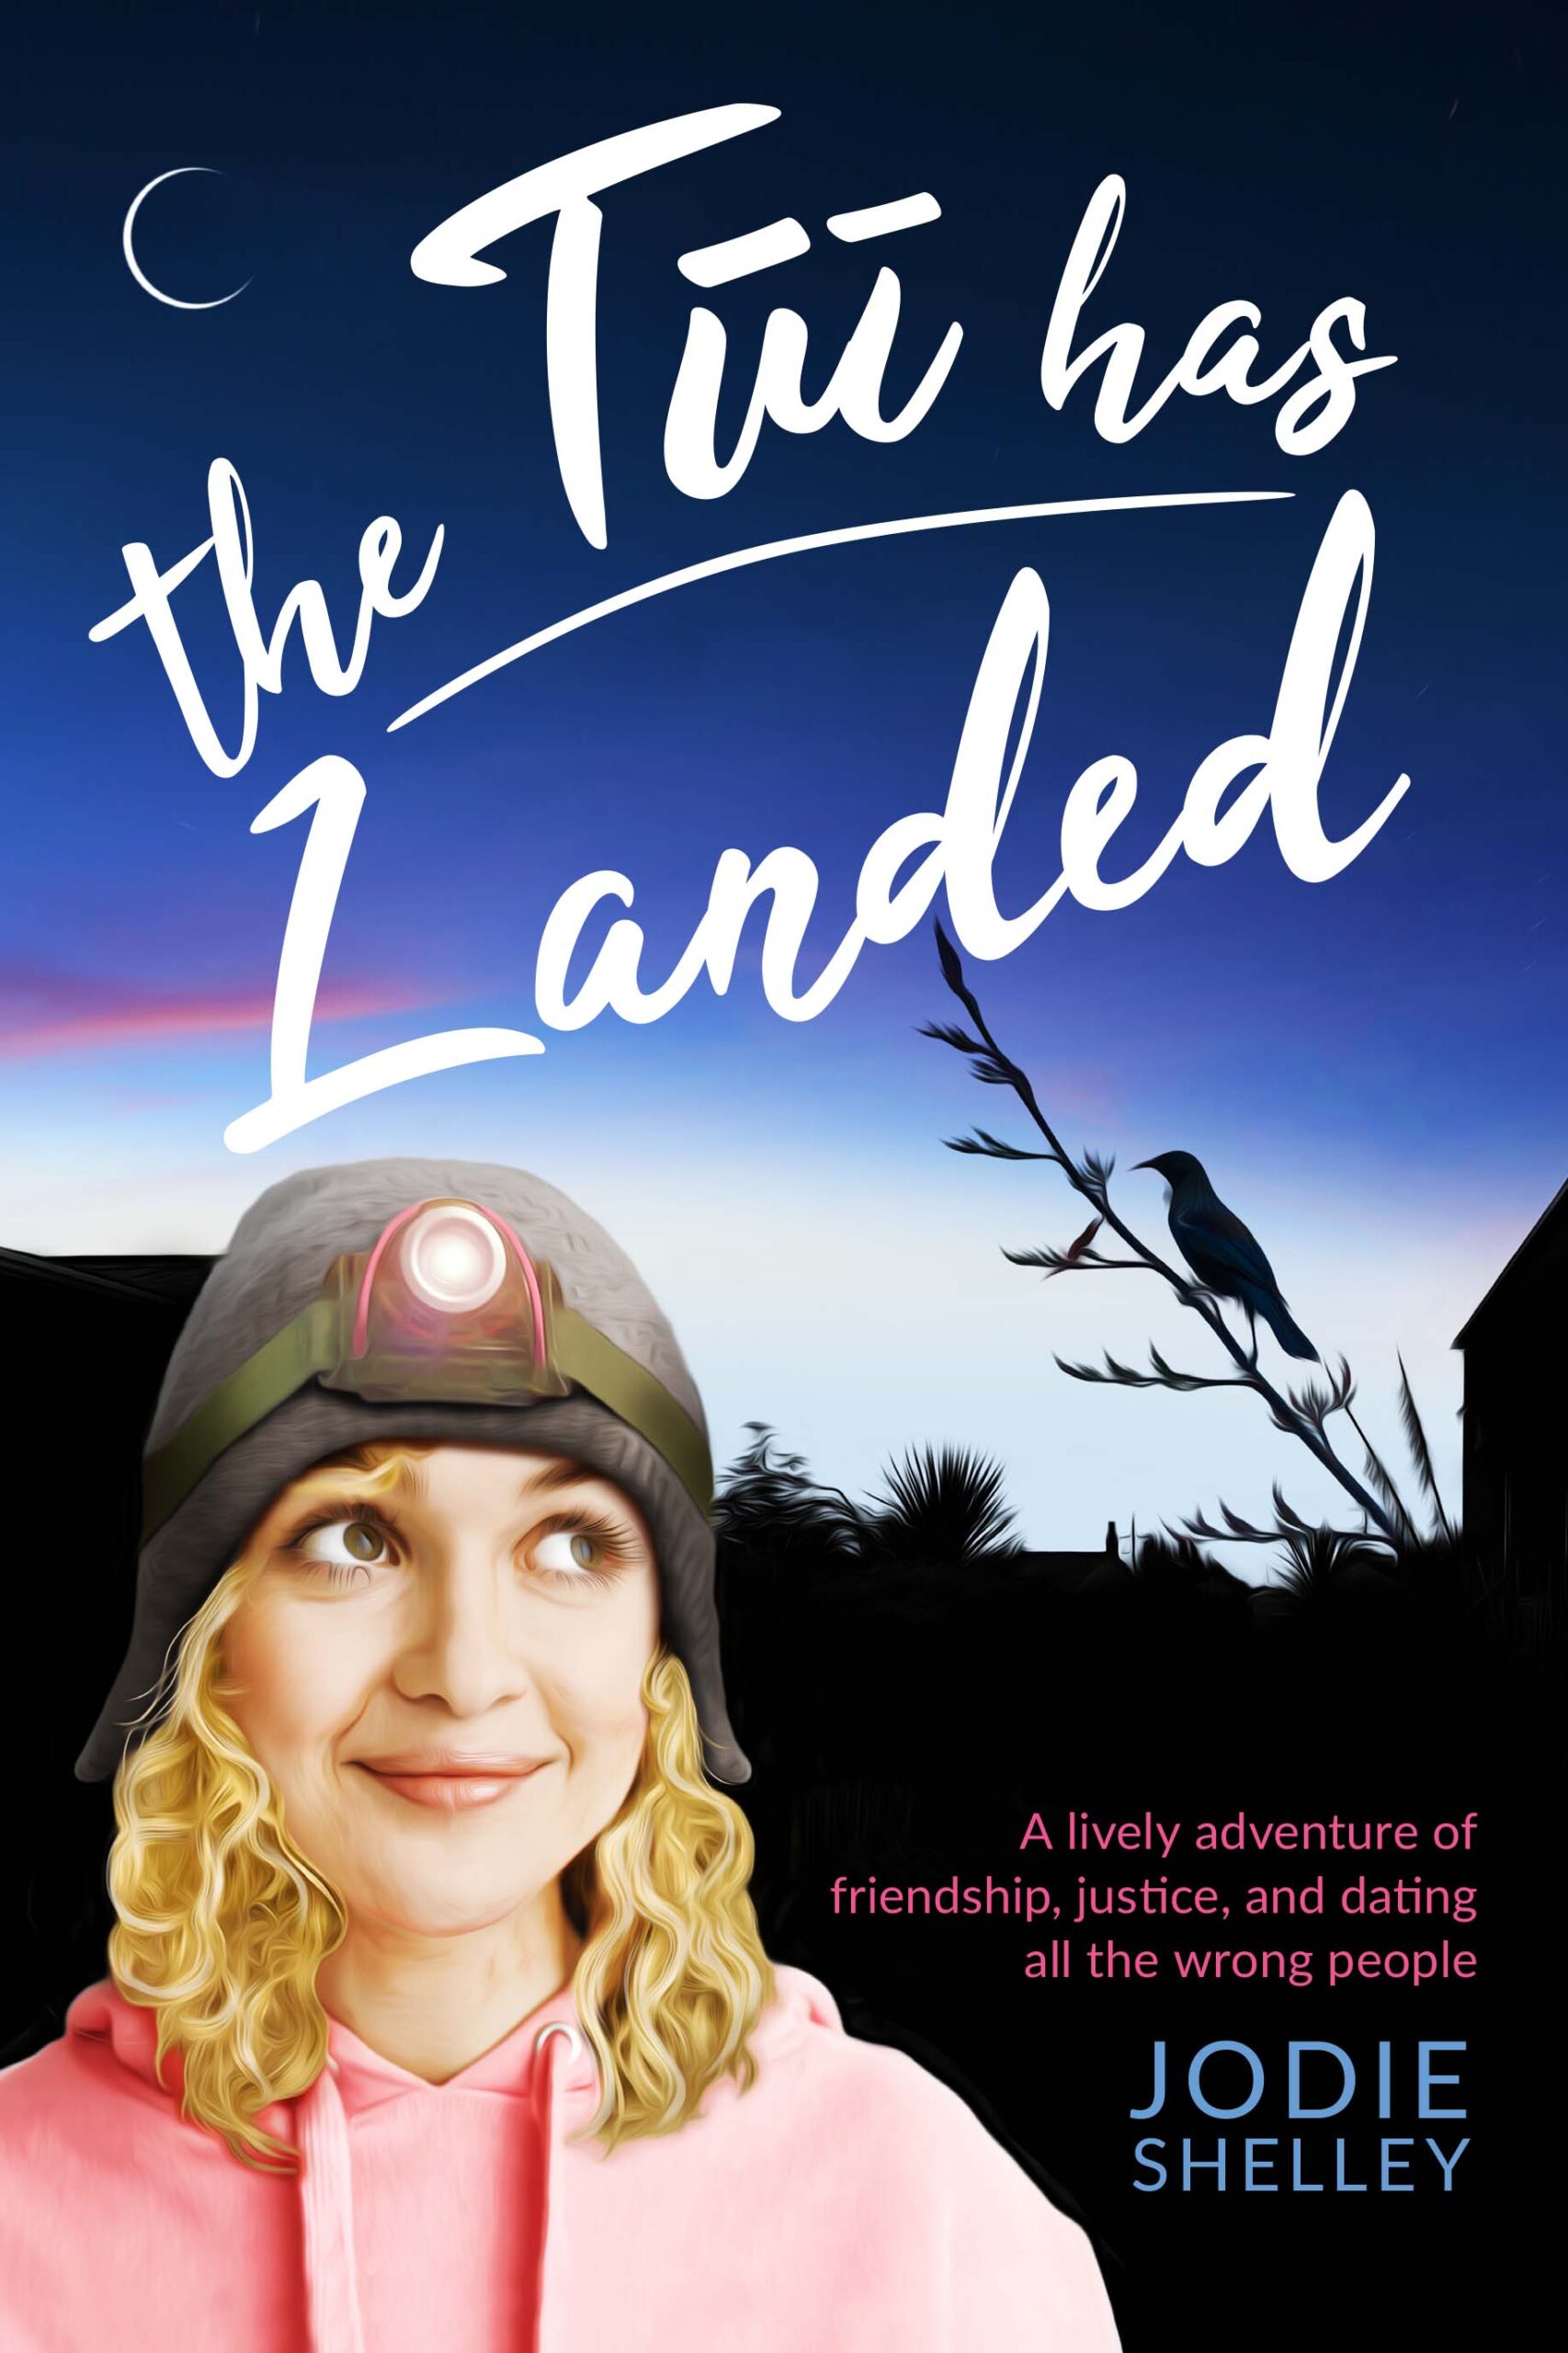 The Tui Has Landed by Jodie Shelley book cover